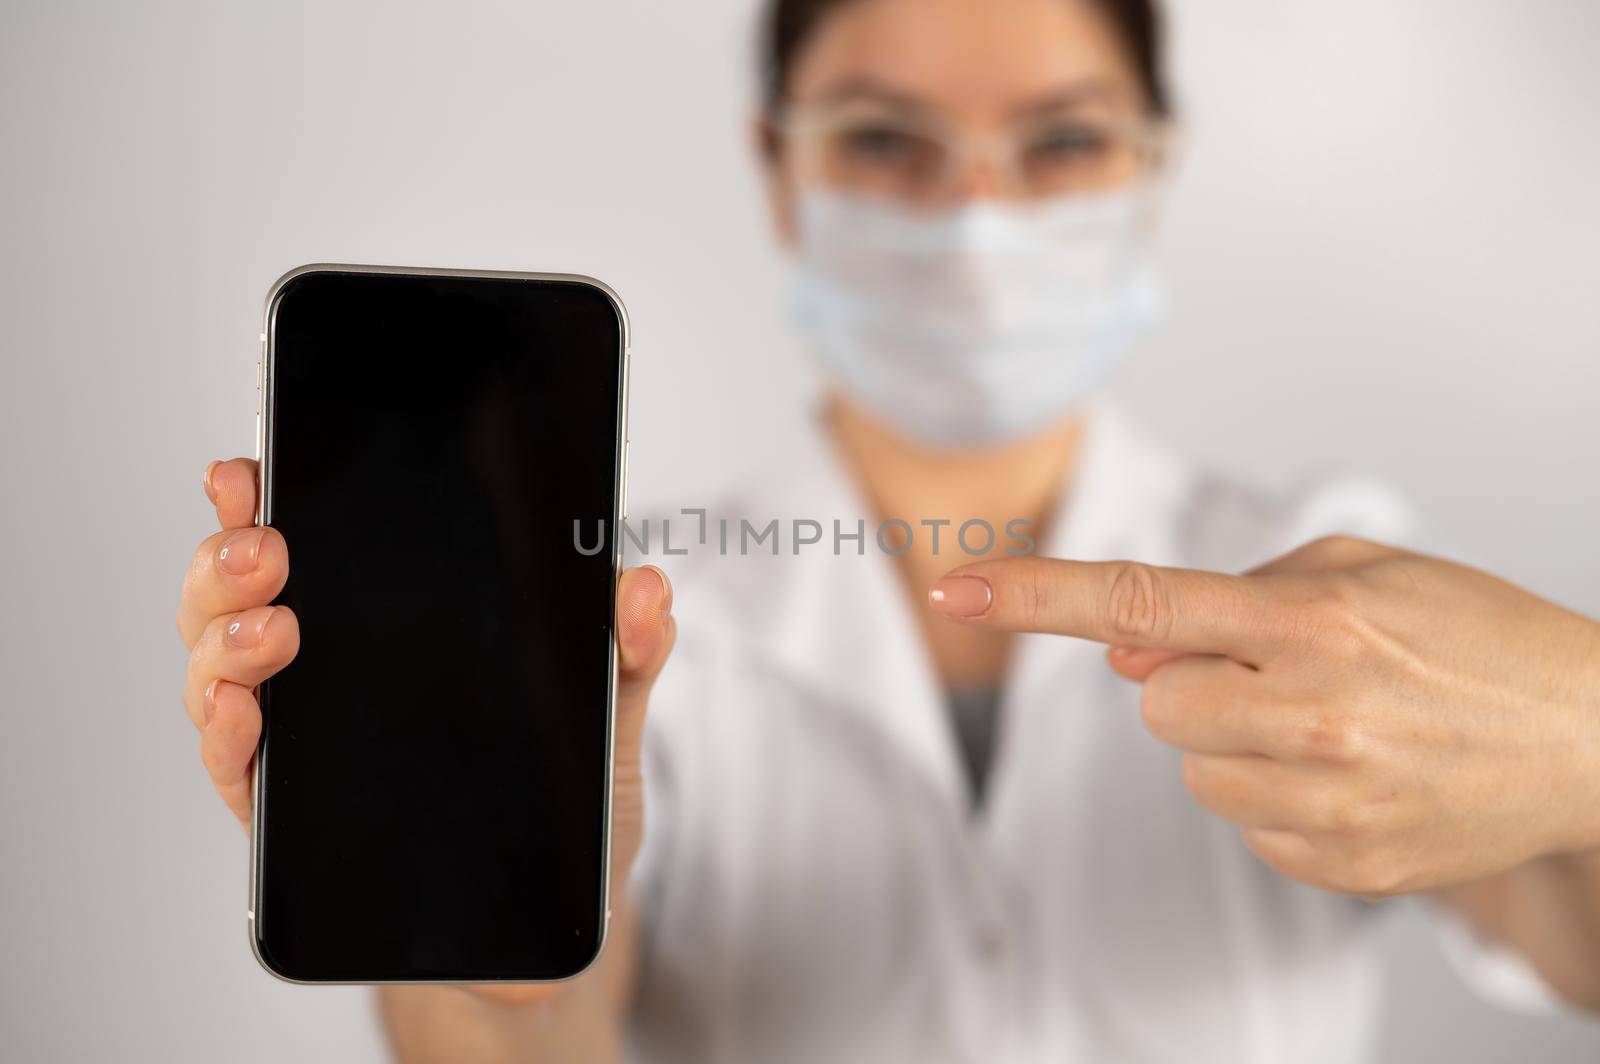 The doctor holds a smartphone with a black screen on a white background